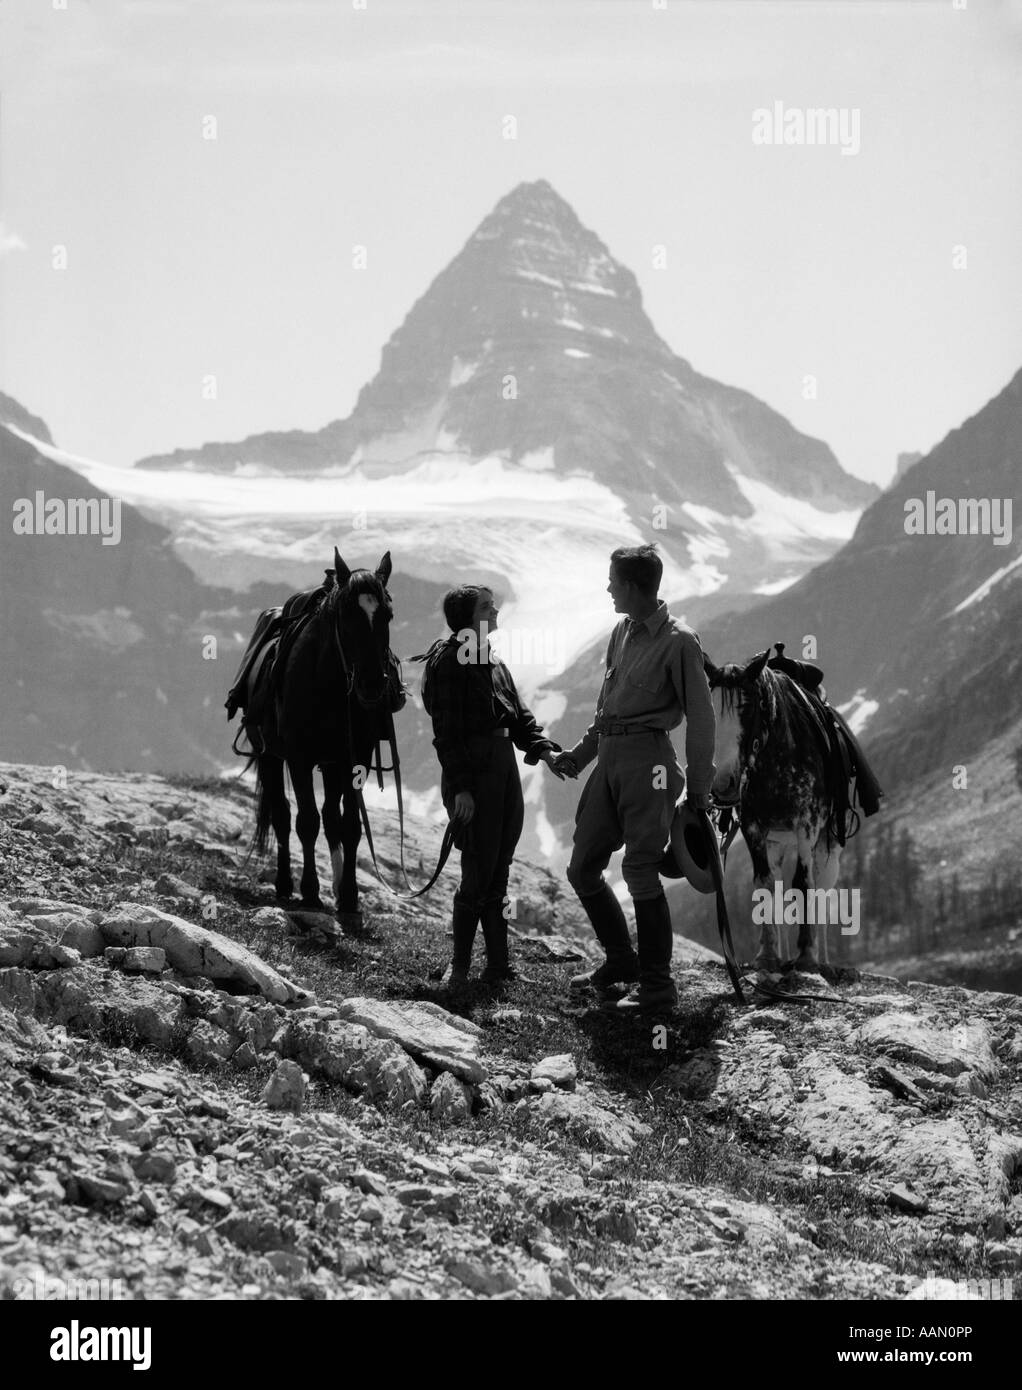 1930s COUPLE MAN WOMAN HOLDING HANDS STANDING WITH HORSES IN MOUNTAINS WESTERN MT. ASSINIBOINE CANADA Stock Photo